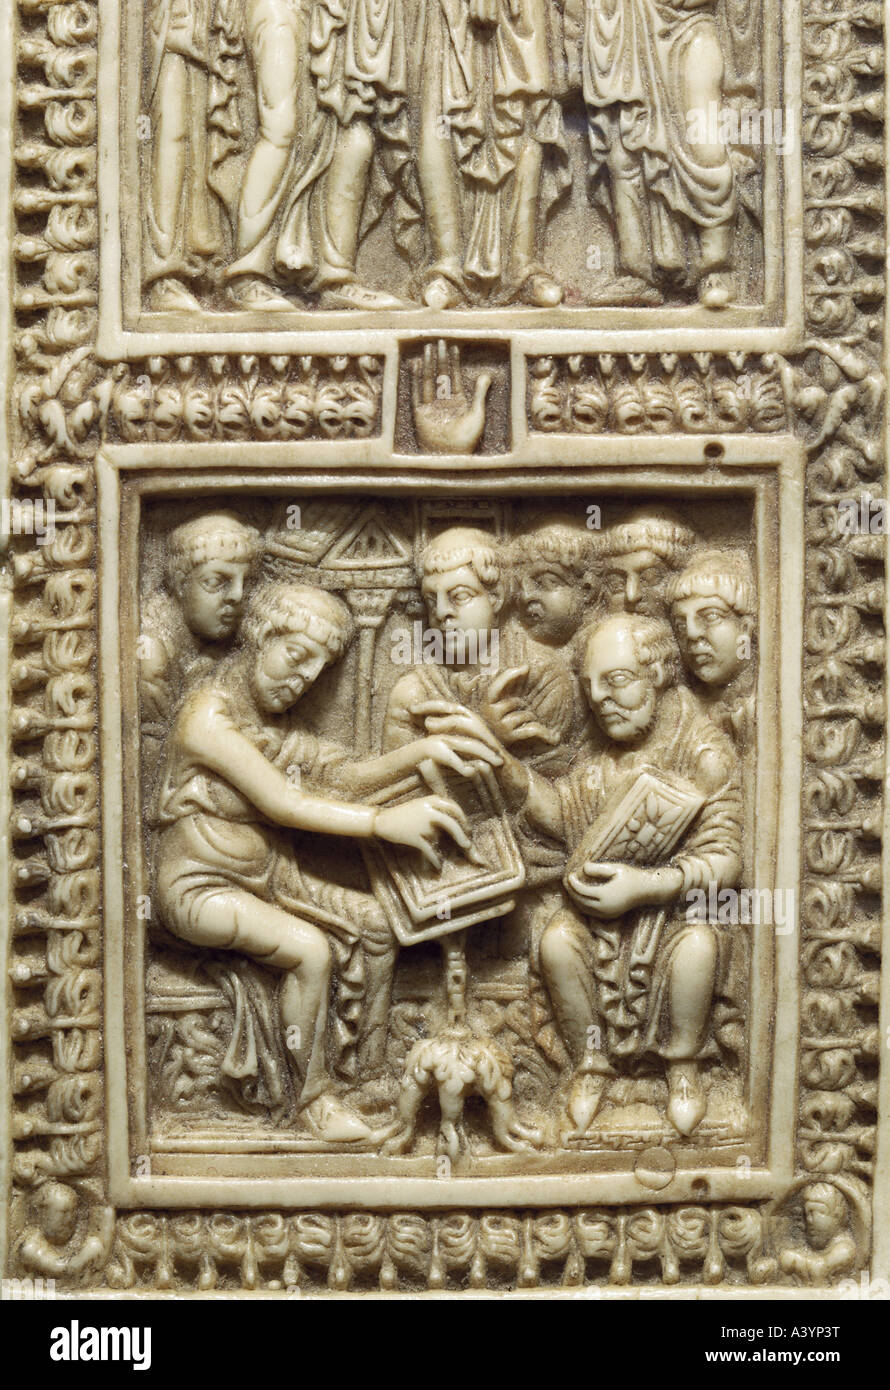 fine arts, middle ages, craft / handcraft, Dagobert psalter, cover, detail, Jerome dictating corrected psalter text, 783 - 795, Stock Photo